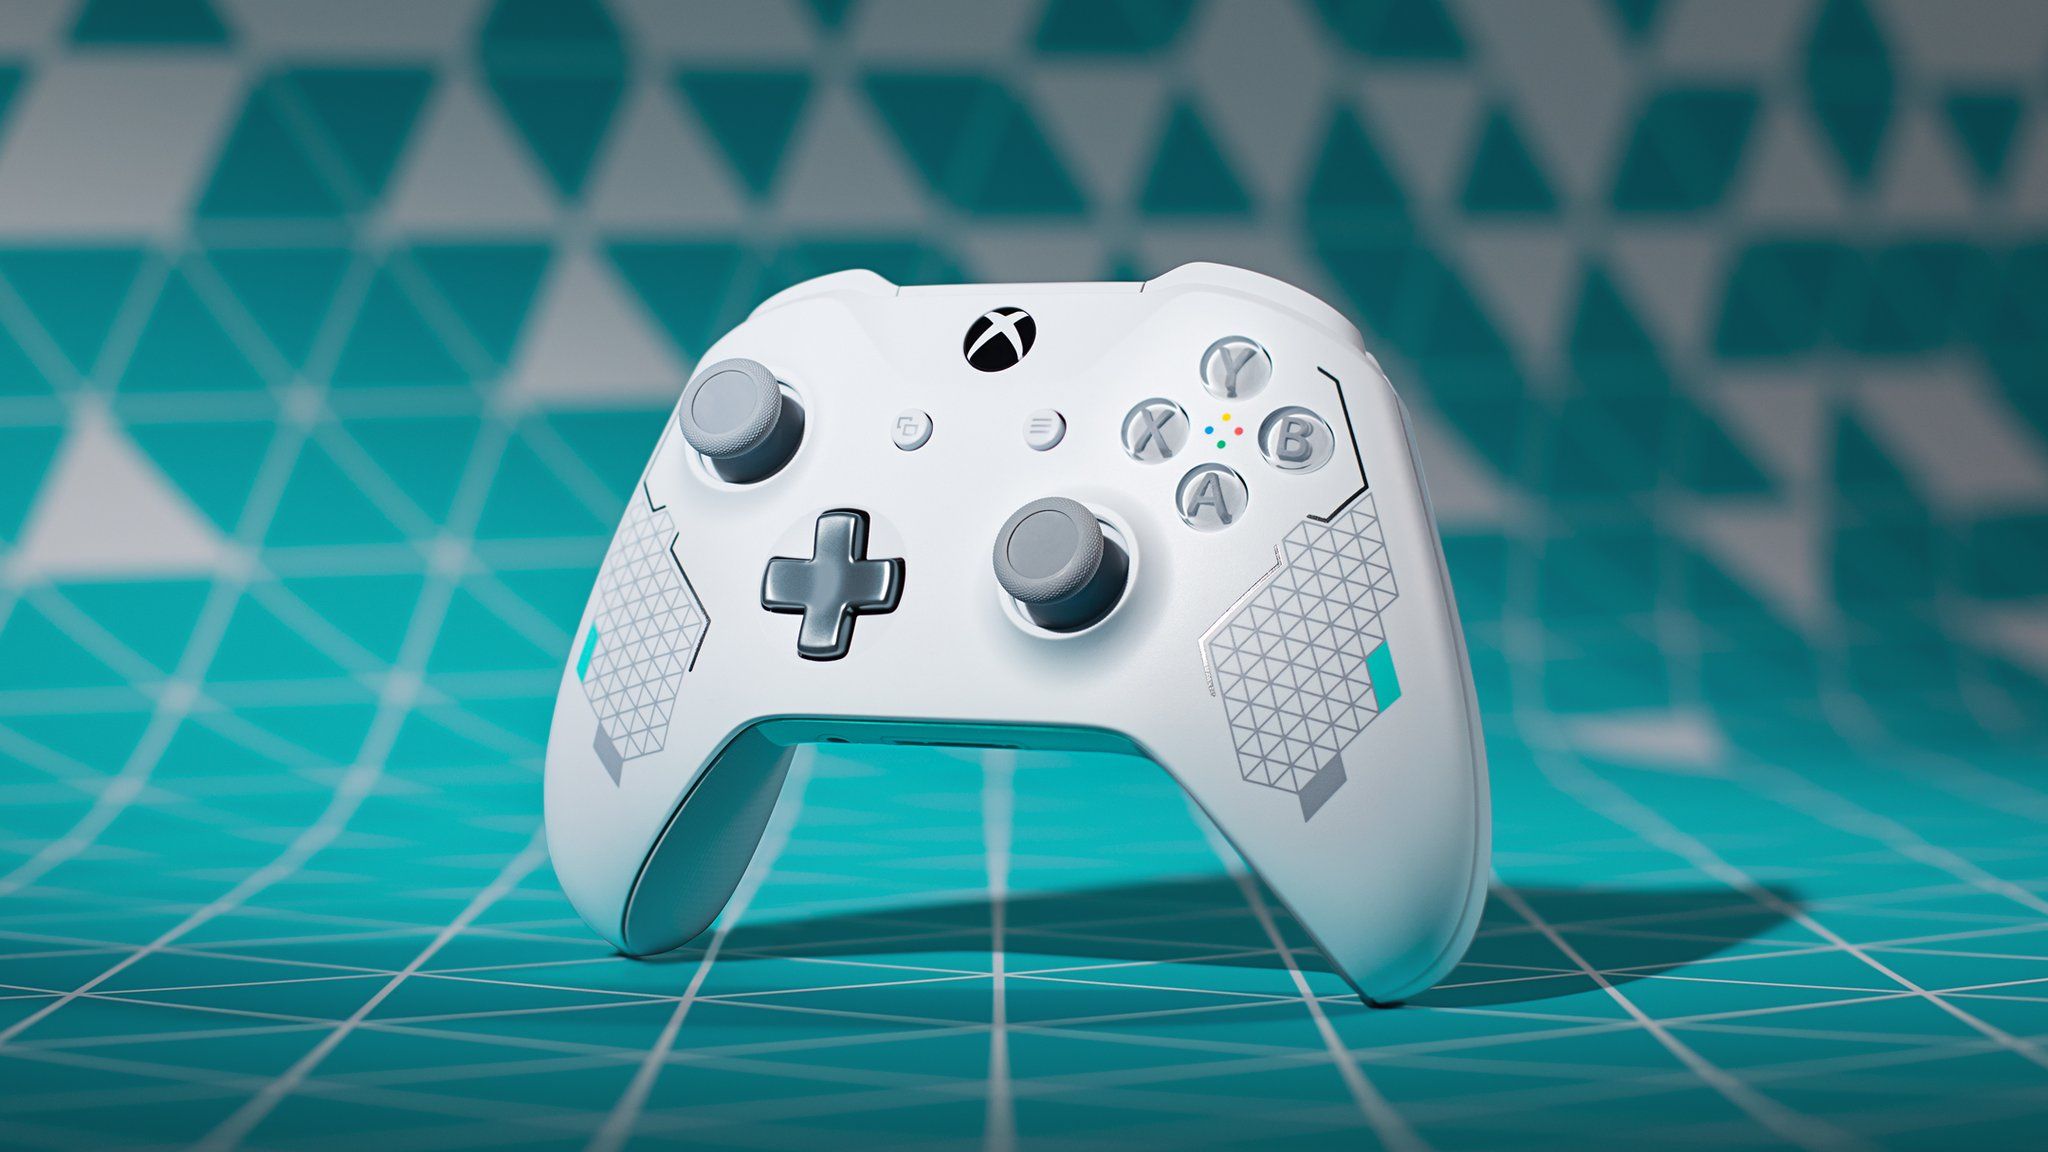 Google's latest Android Pie release supports Xbox One controllers